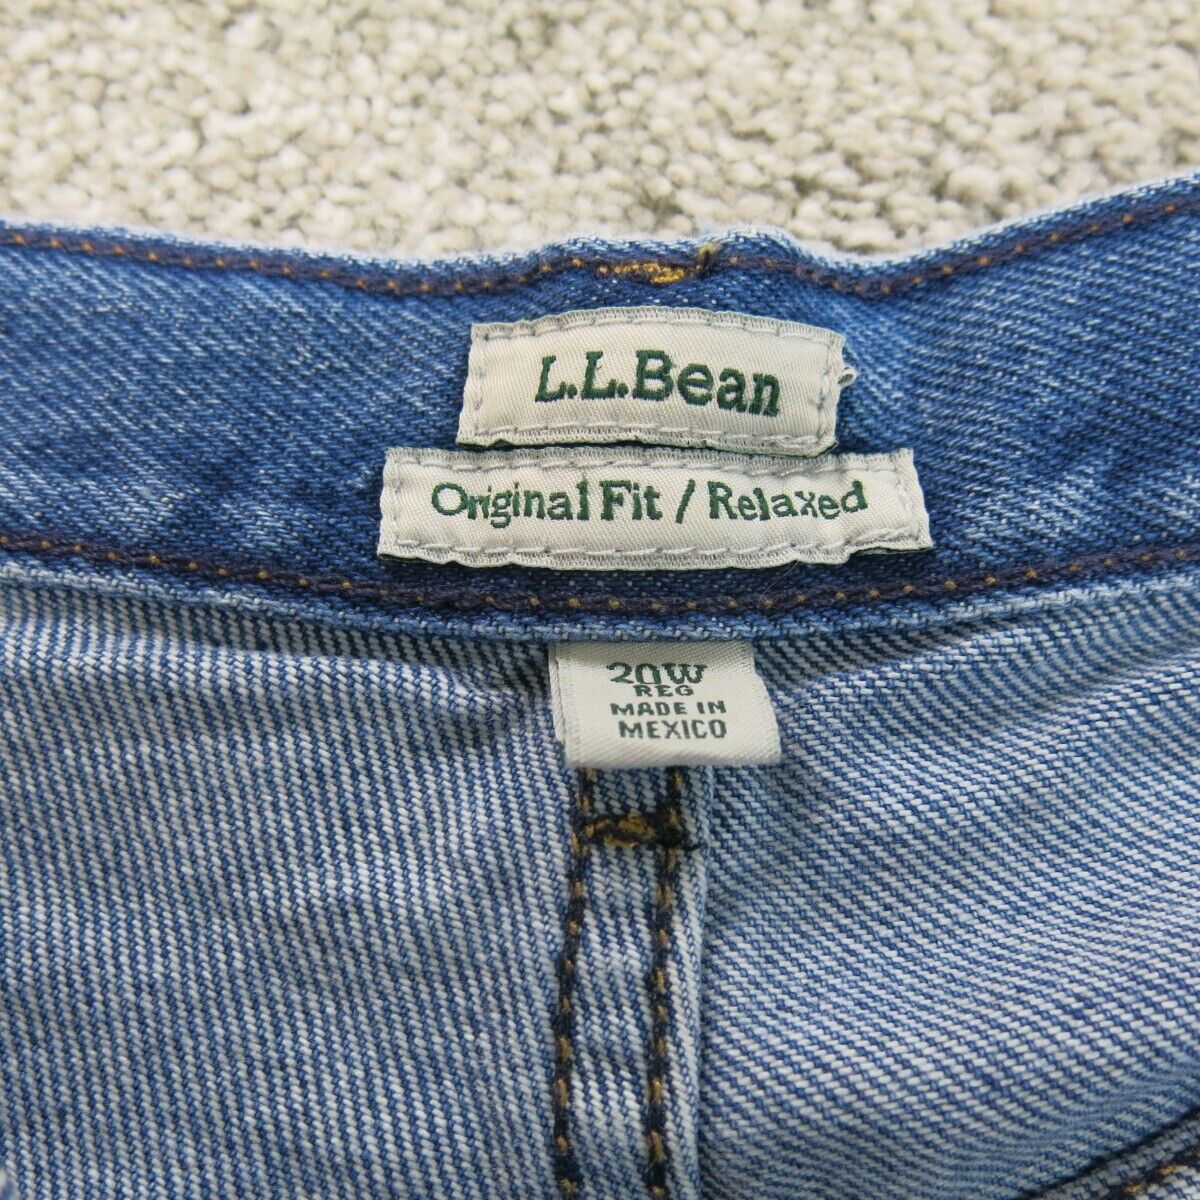 LL BEAN Original Fit Relaxed Fleece Lined Jeans Size 18